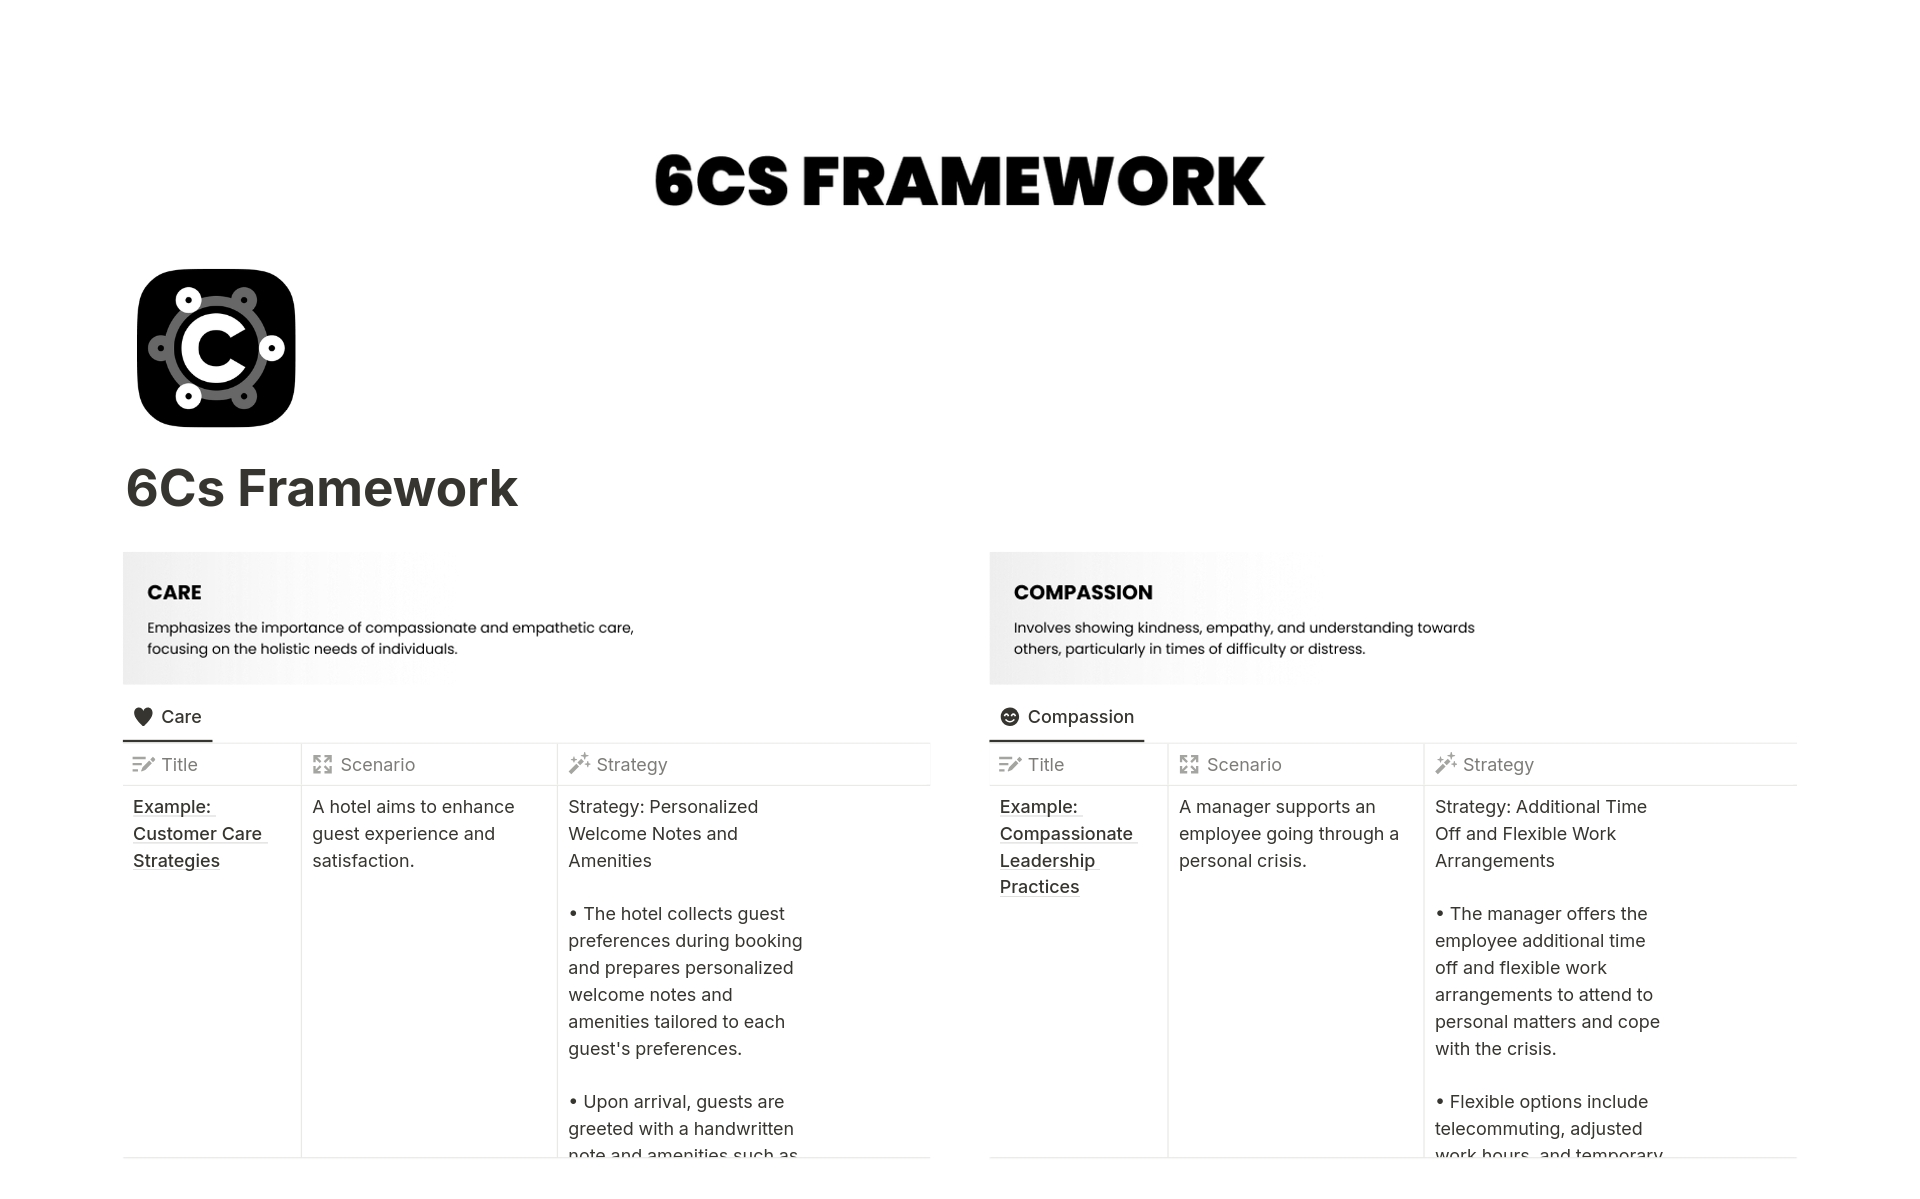 Empower Your Team with the 6Cs Framework!